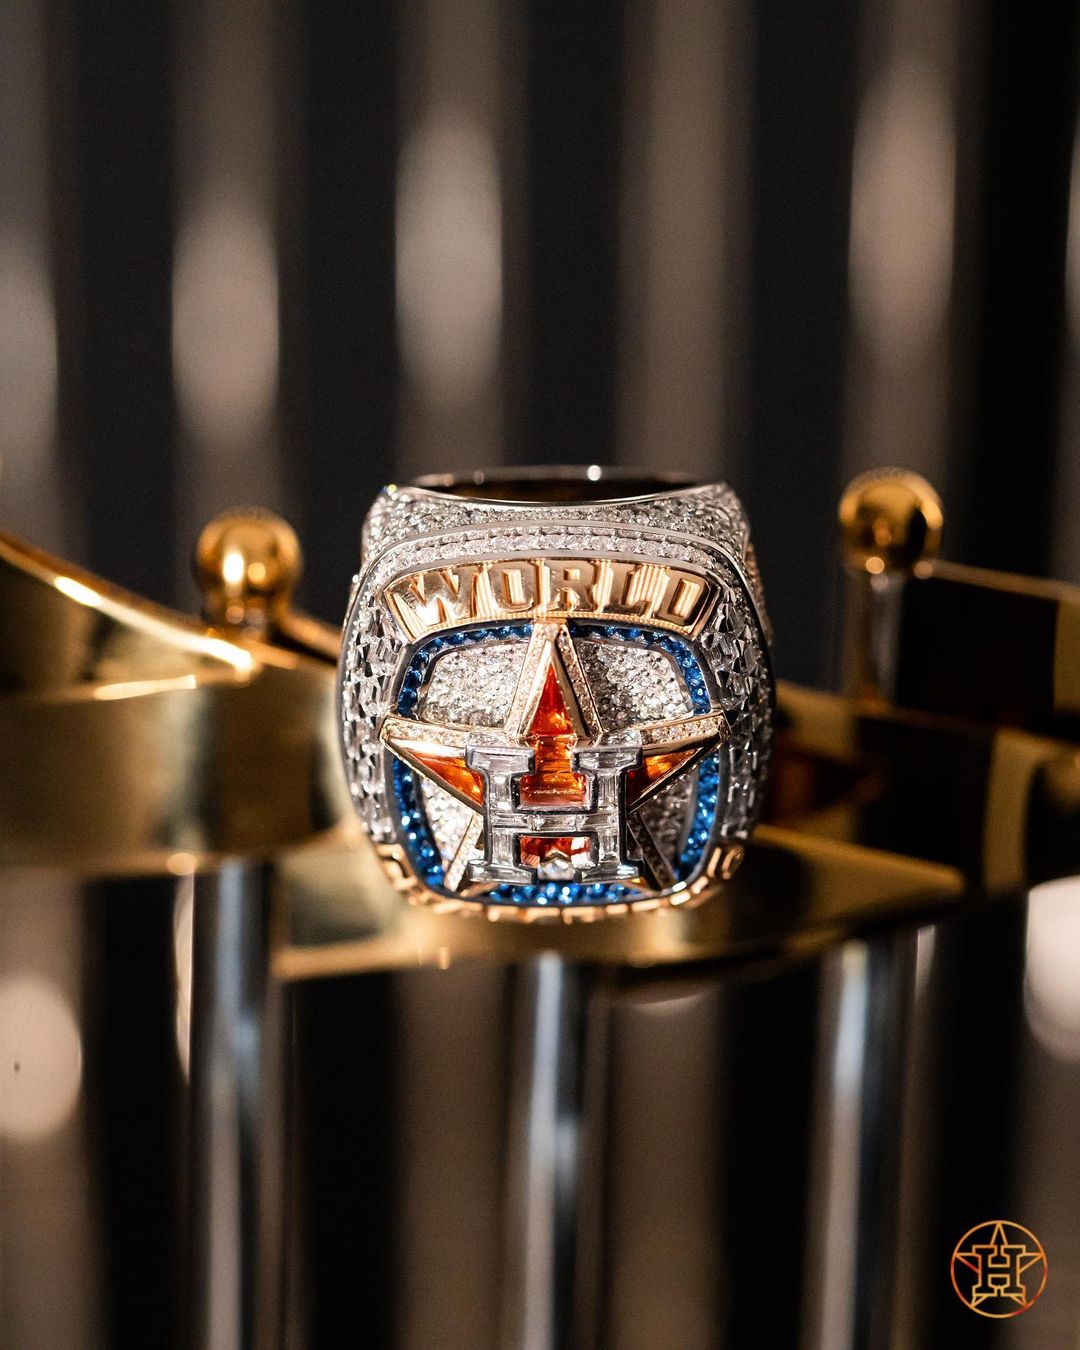 An Inside Look At the Houston Astros' World Series Championship Ring